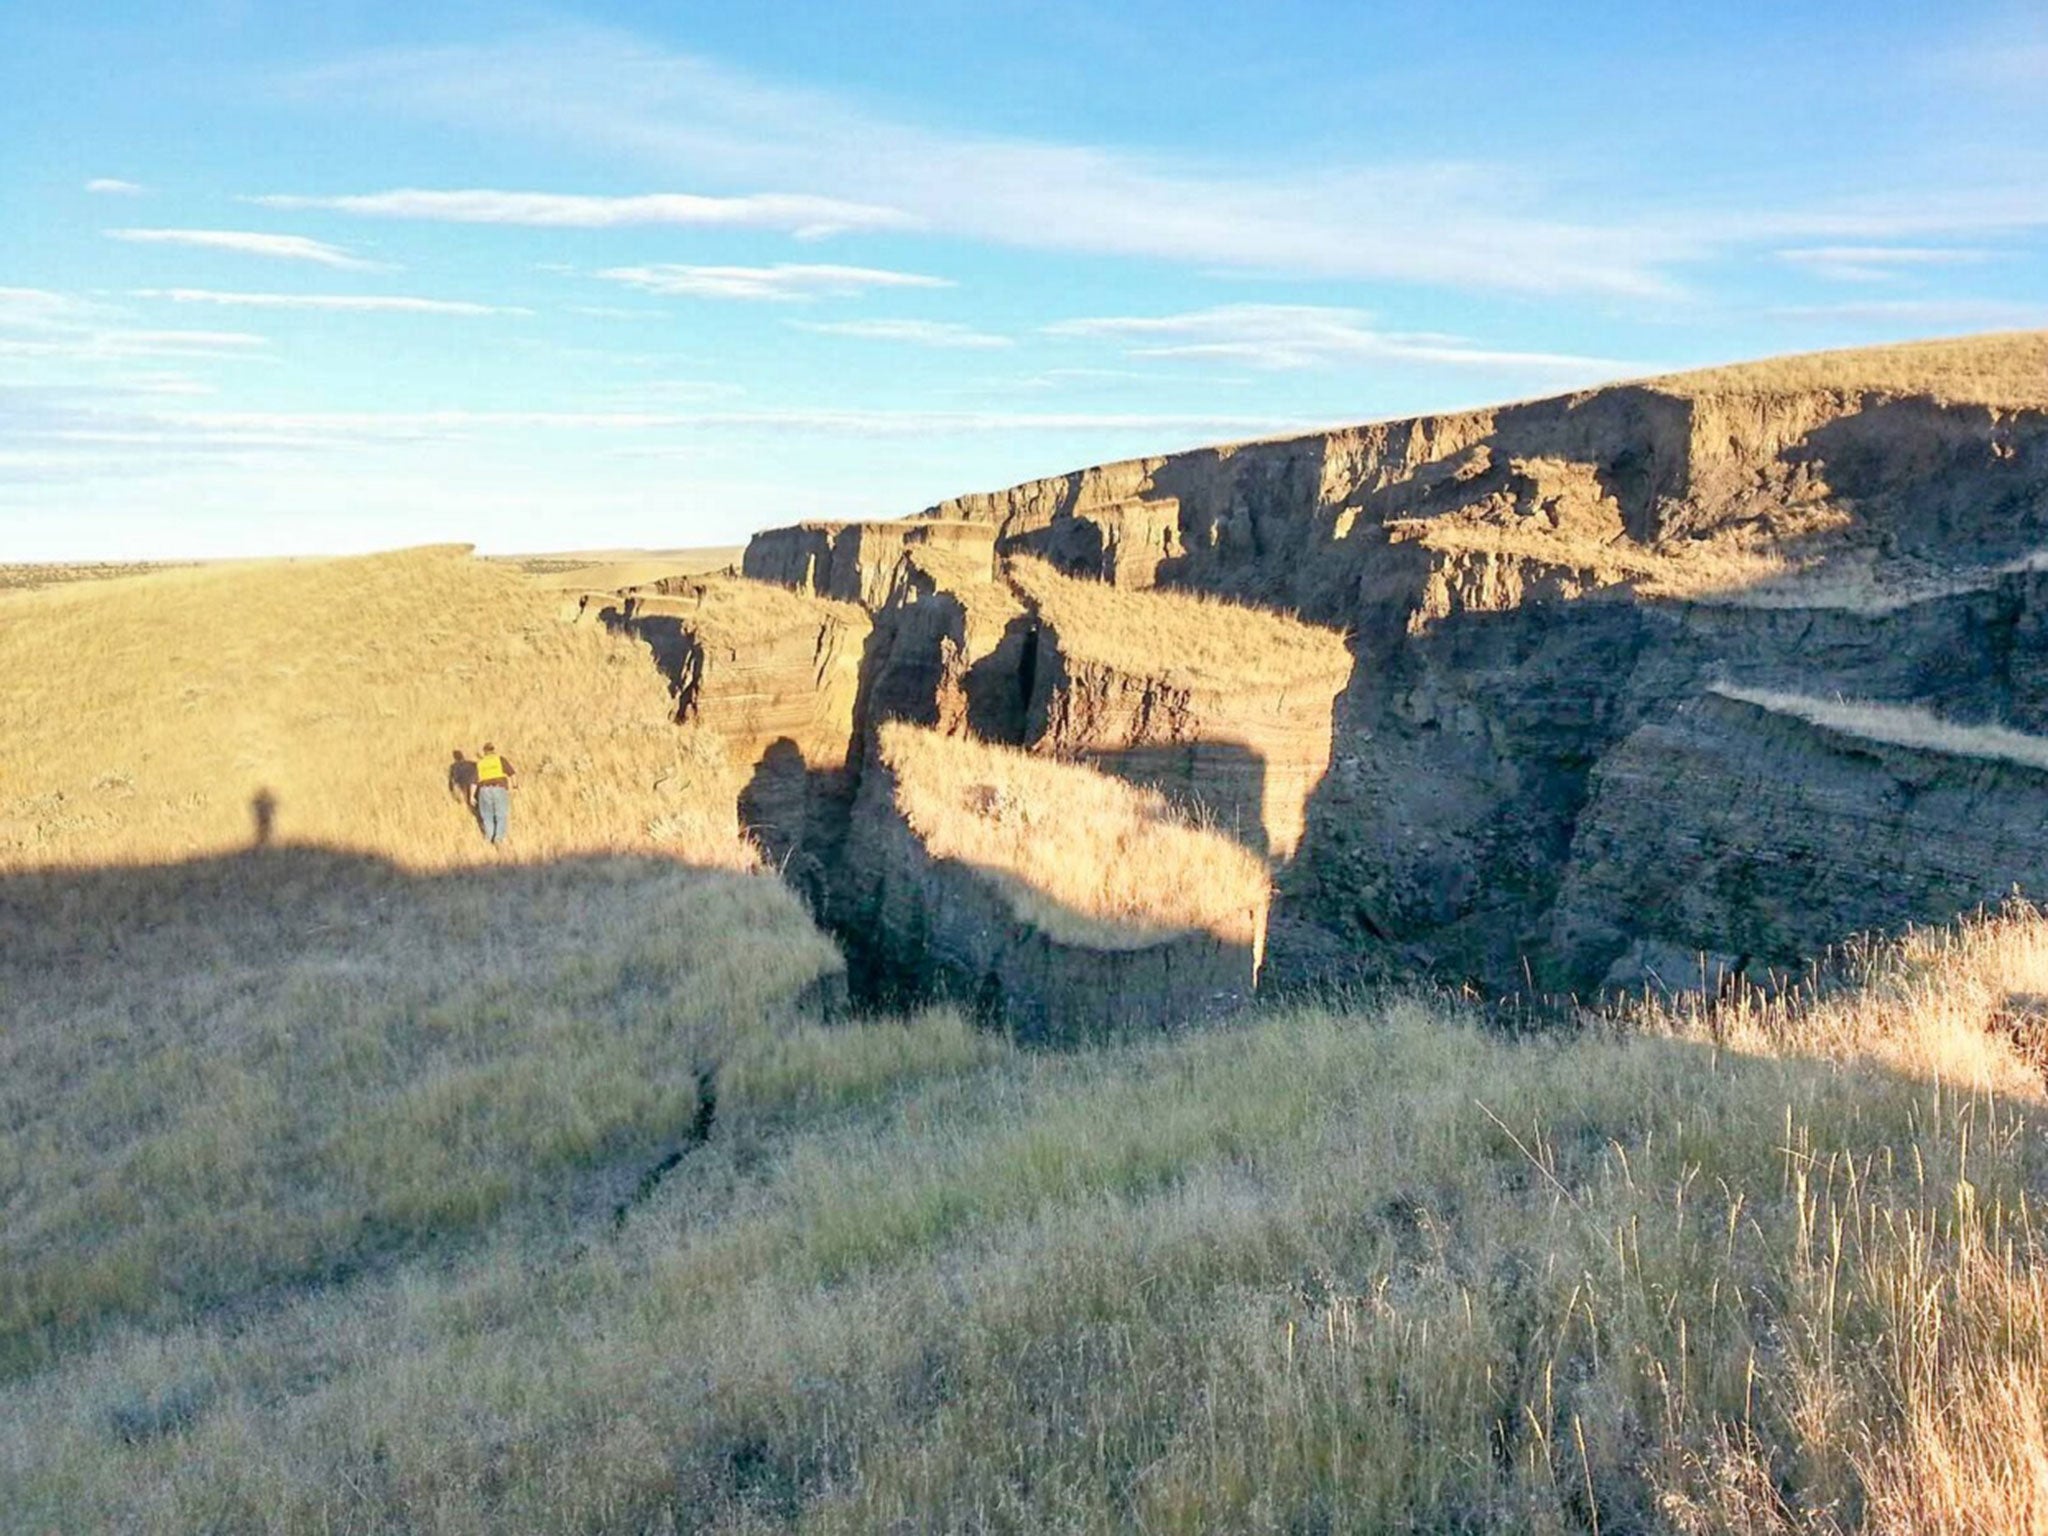 The crack opened up in foothills of Wyoming’s Bighorn Mountains in the last fortnight